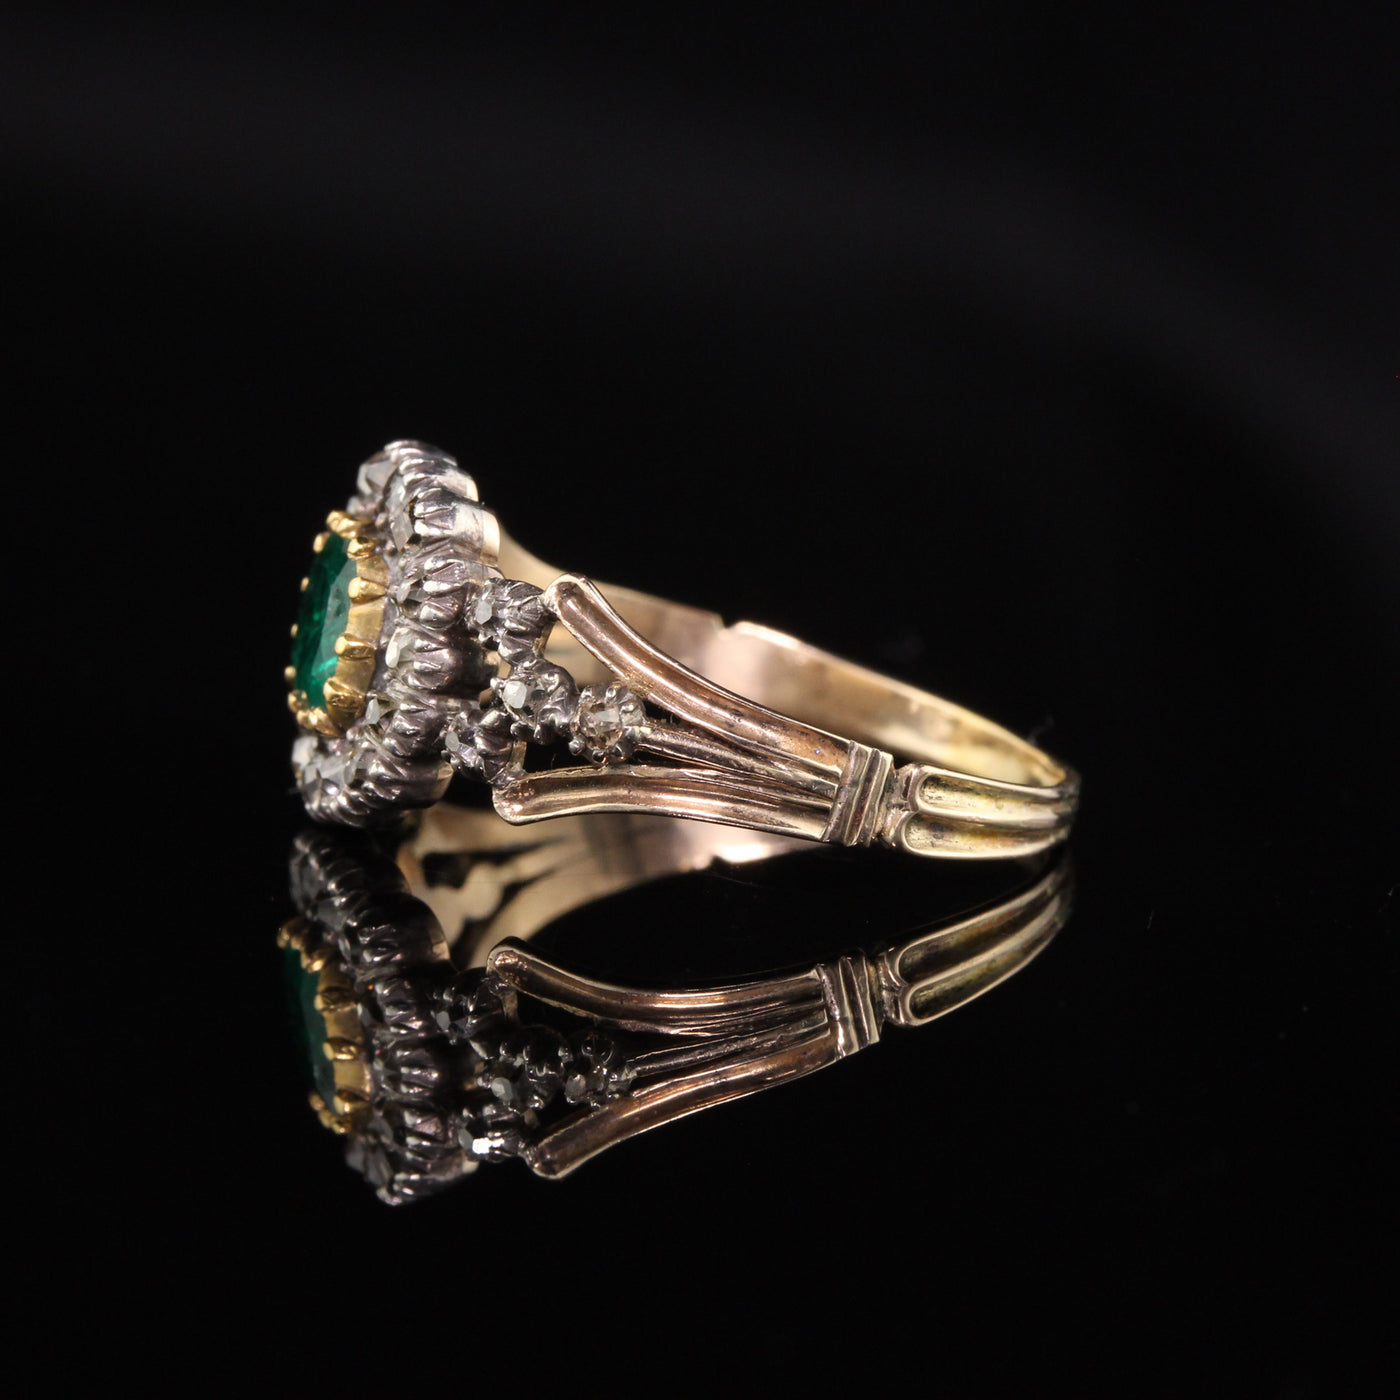 Antique Georgian 18K Yellow Gold and Silver Top Rose Cut Diamond and Emerald Engagement Ring